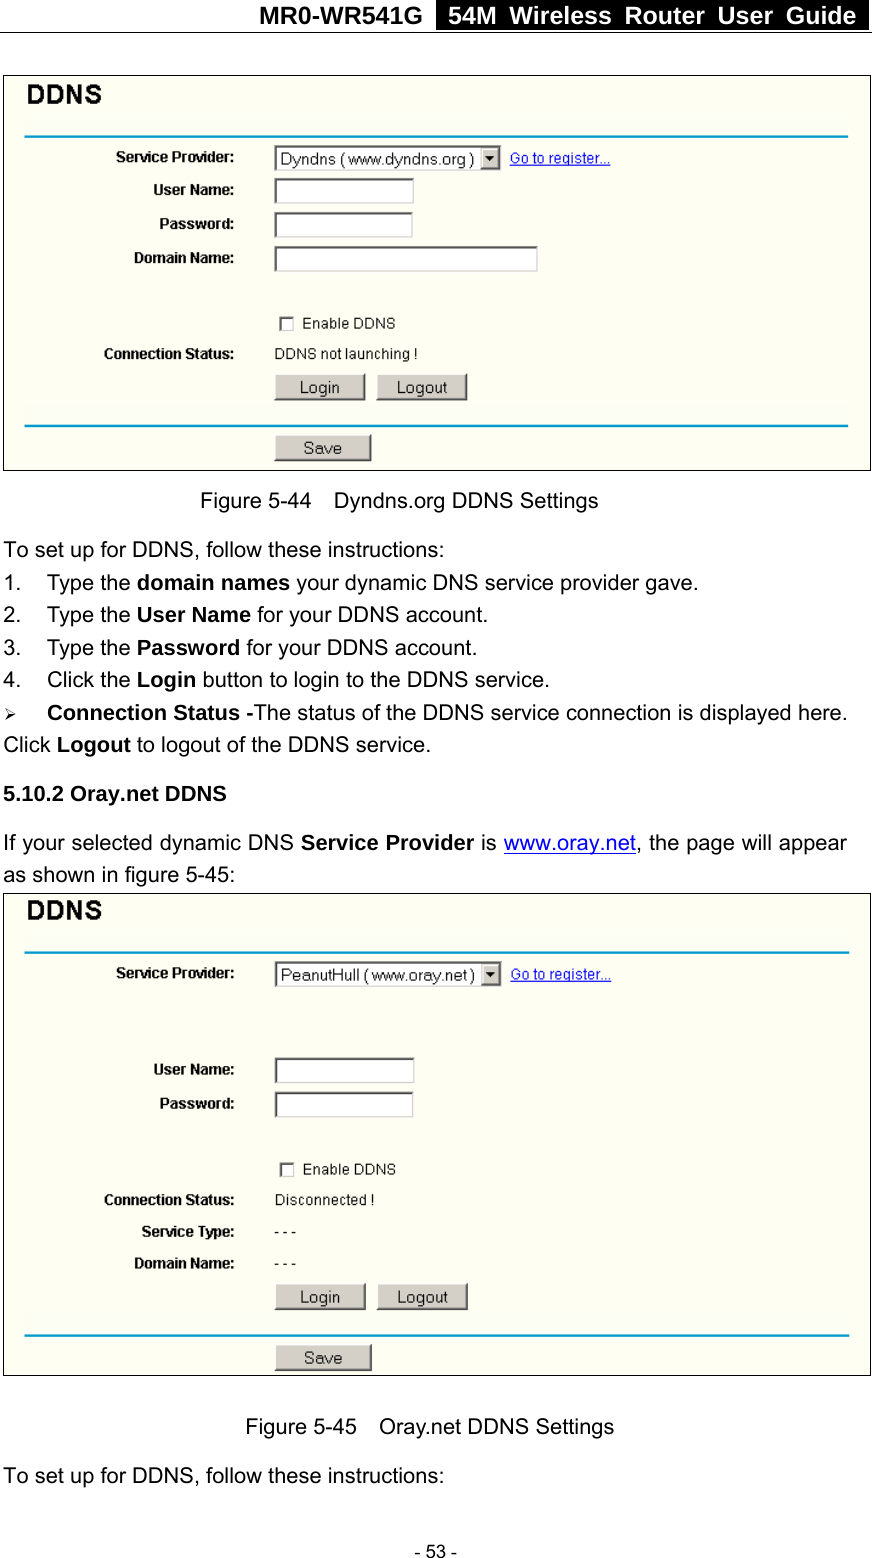 MR0-WR541G   54M Wireless Router User Guide   Figure 5-44    Dyndns.org DDNS Settings To set up for DDNS, follow these instructions: 1. Type the domain names your dynamic DNS service provider gave.   2. Type the User Name for your DDNS account.   3. Type the Password for your DDNS account.   4. Click the Login button to login to the DDNS service. ¾ Connection Status -The status of the DDNS service connection is displayed here. Click Logout to logout of the DDNS service. 5.10.2 Oray.net DDNS If your selected dynamic DNS Service Provider is www.oray.net, the page will appear as shown in figure 5-45:   Figure 5-45    Oray.net DDNS Settings To set up for DDNS, follow these instructions:  - 53 - 